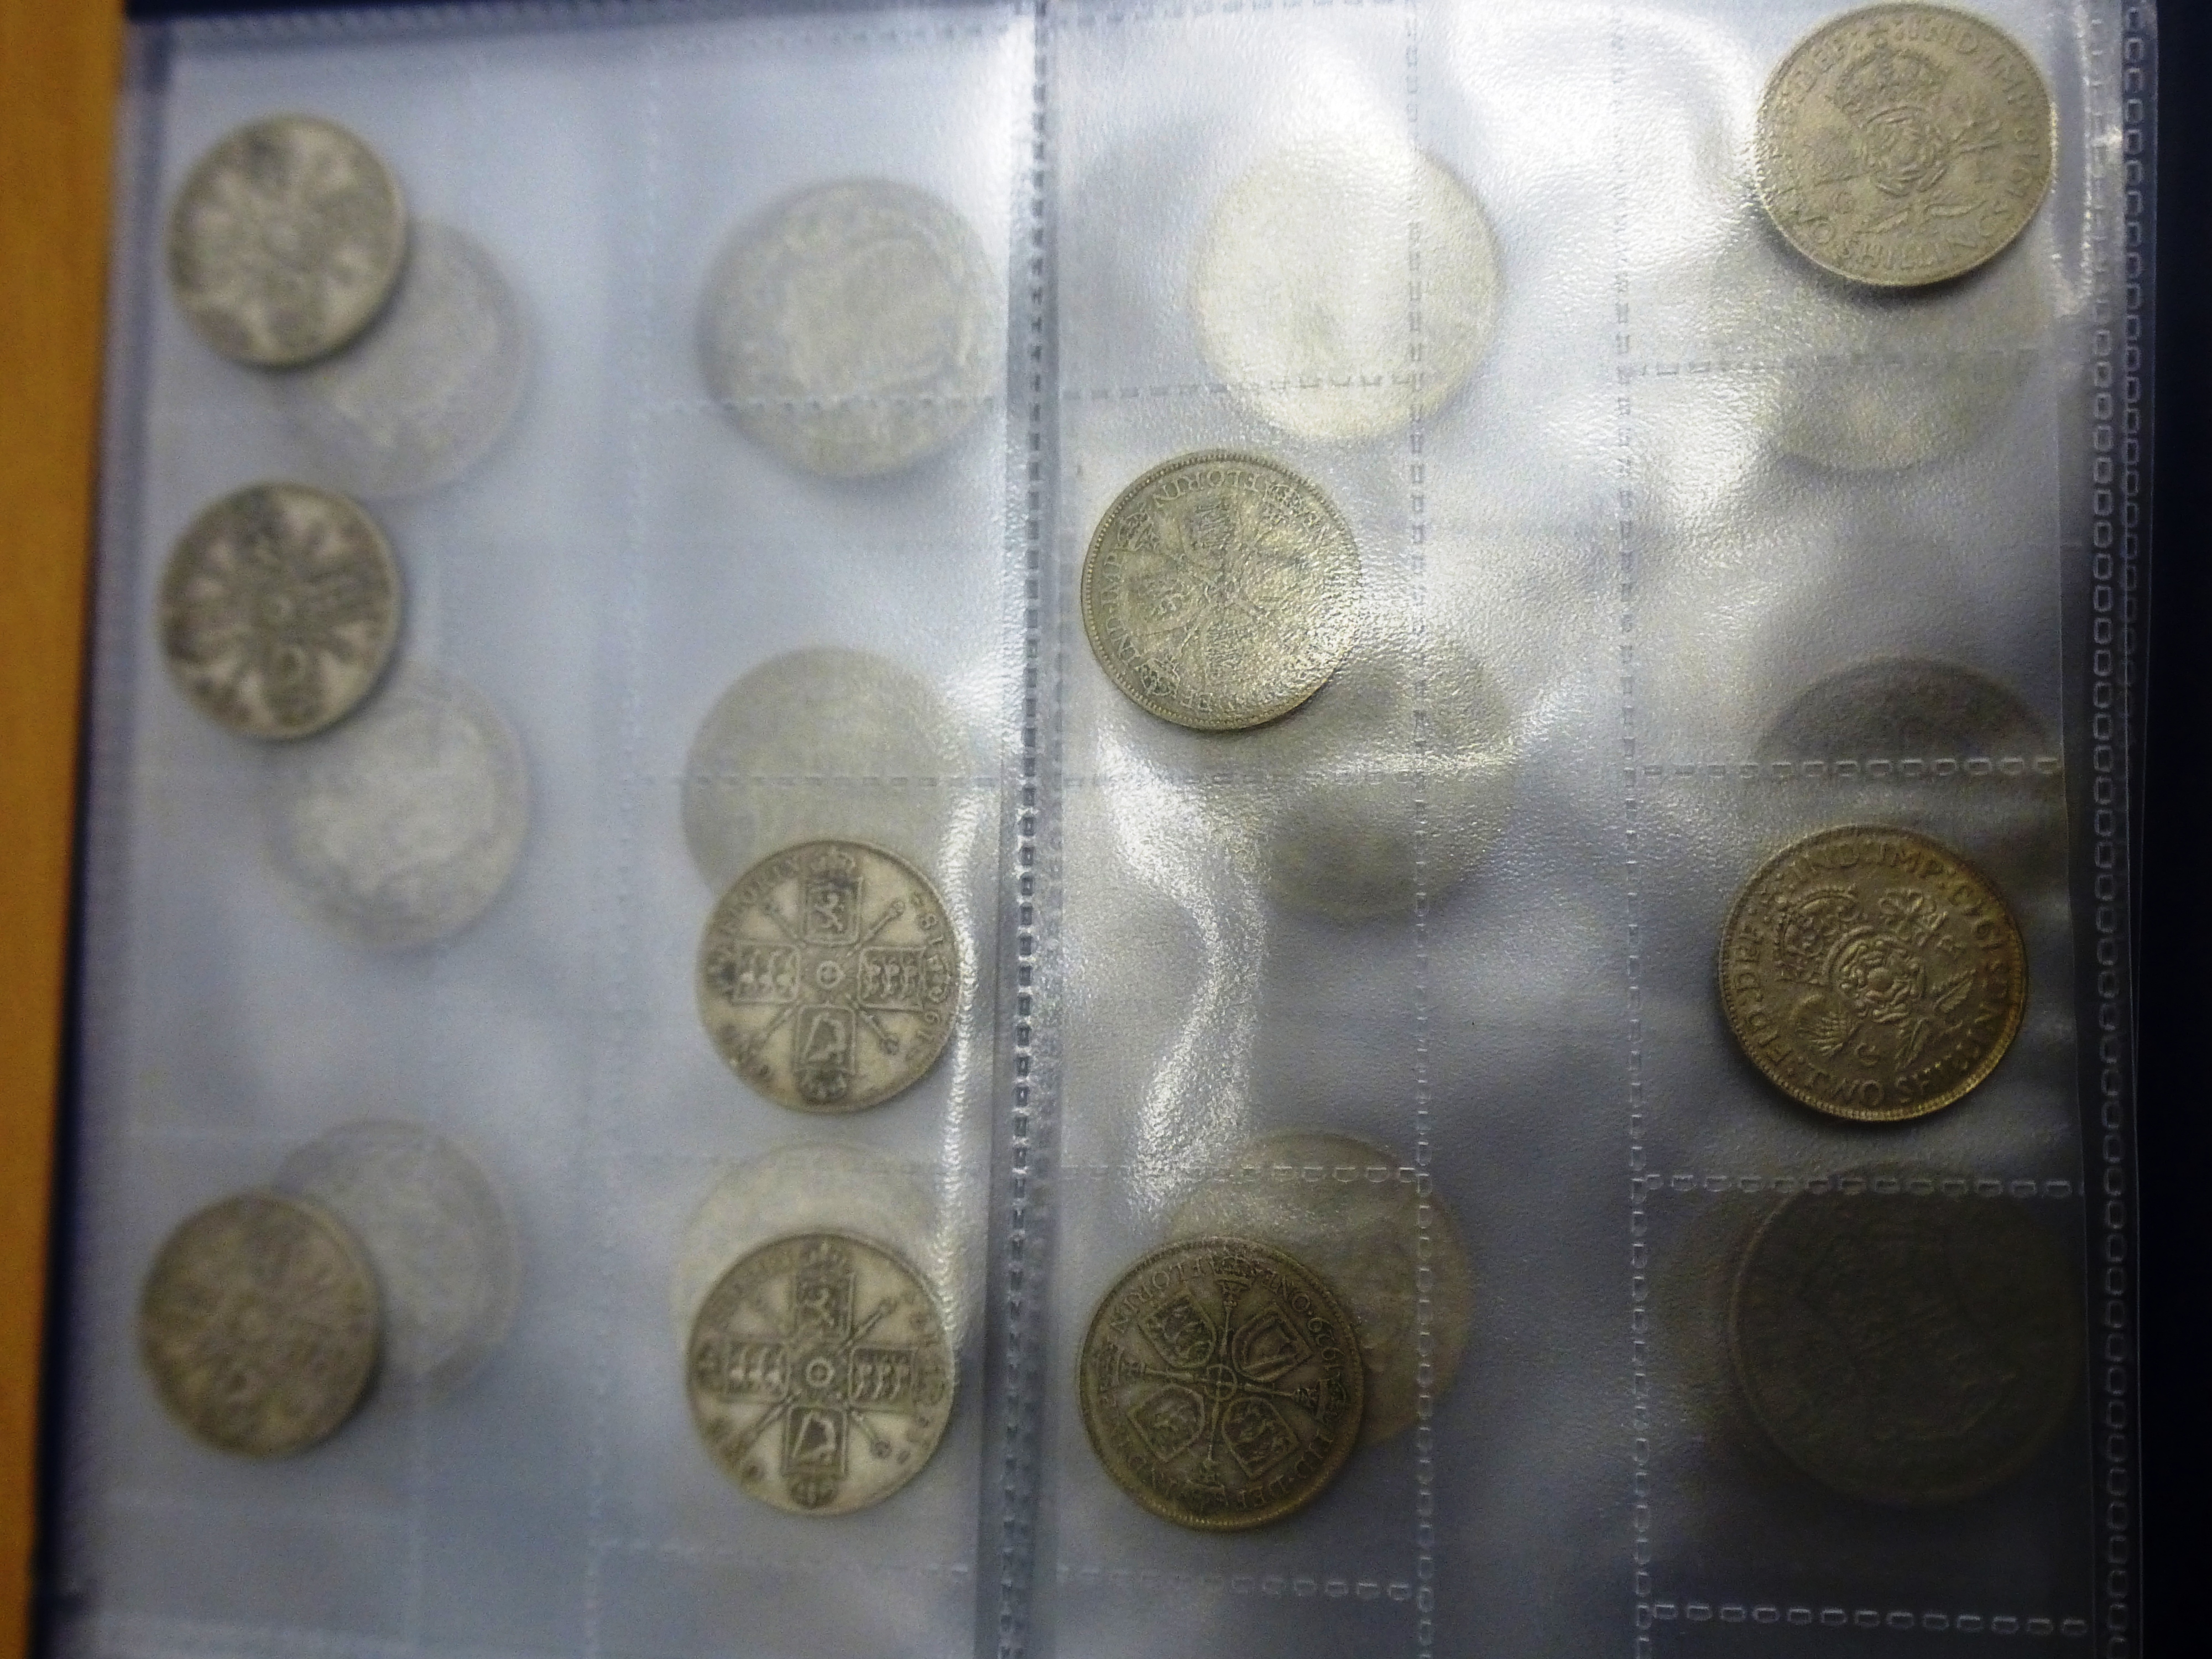 COIN ALBUM OF ASSORTED COINS AND BANK NOTES MOSTLY UK INCLUDING SILVER COINAGE AND 1890 CROWN - Image 9 of 11